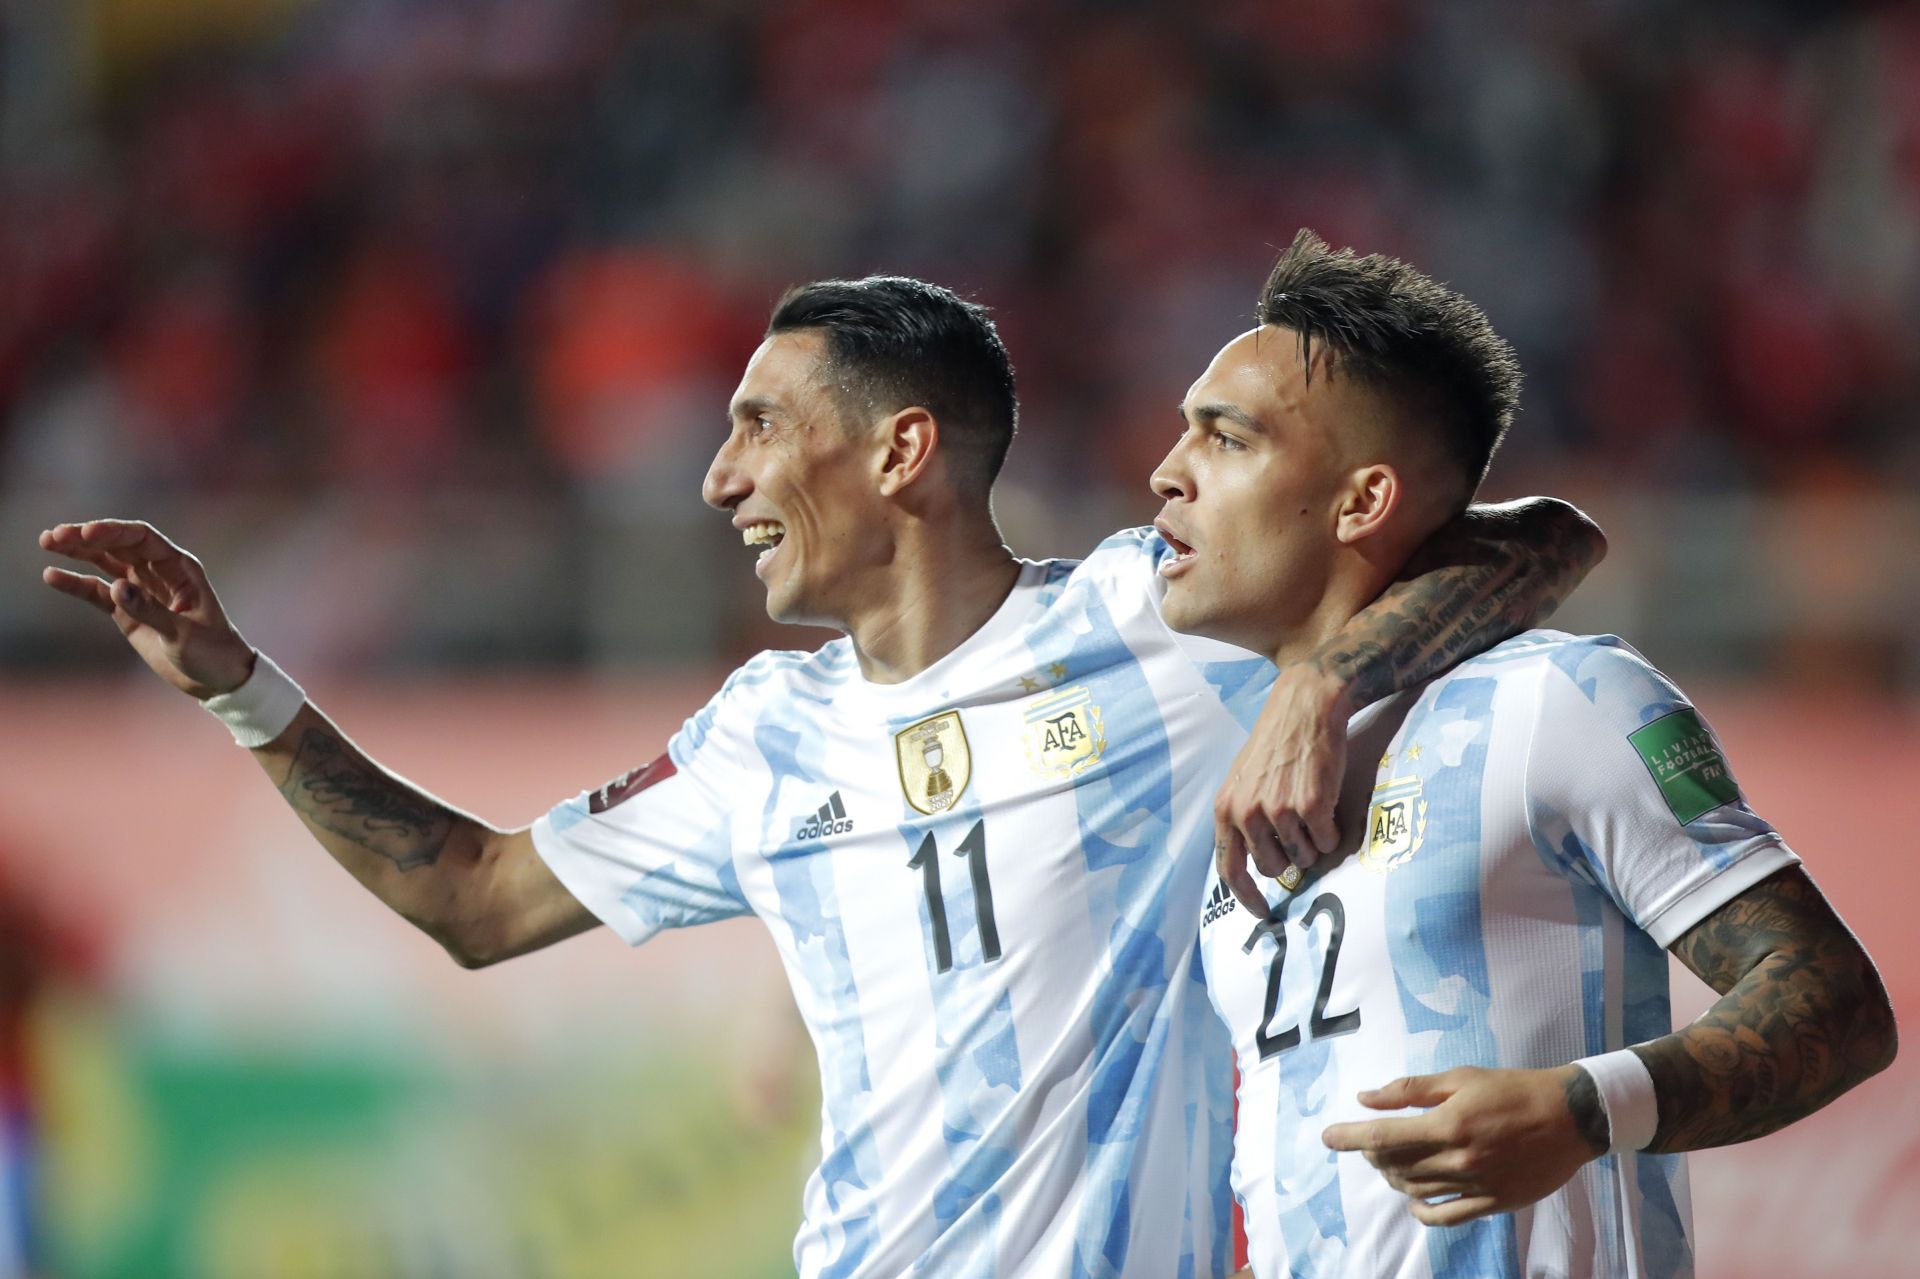 Argentina will host Colombia on Wednesday - FIFA World Cup Qatar 2022 Qualifier